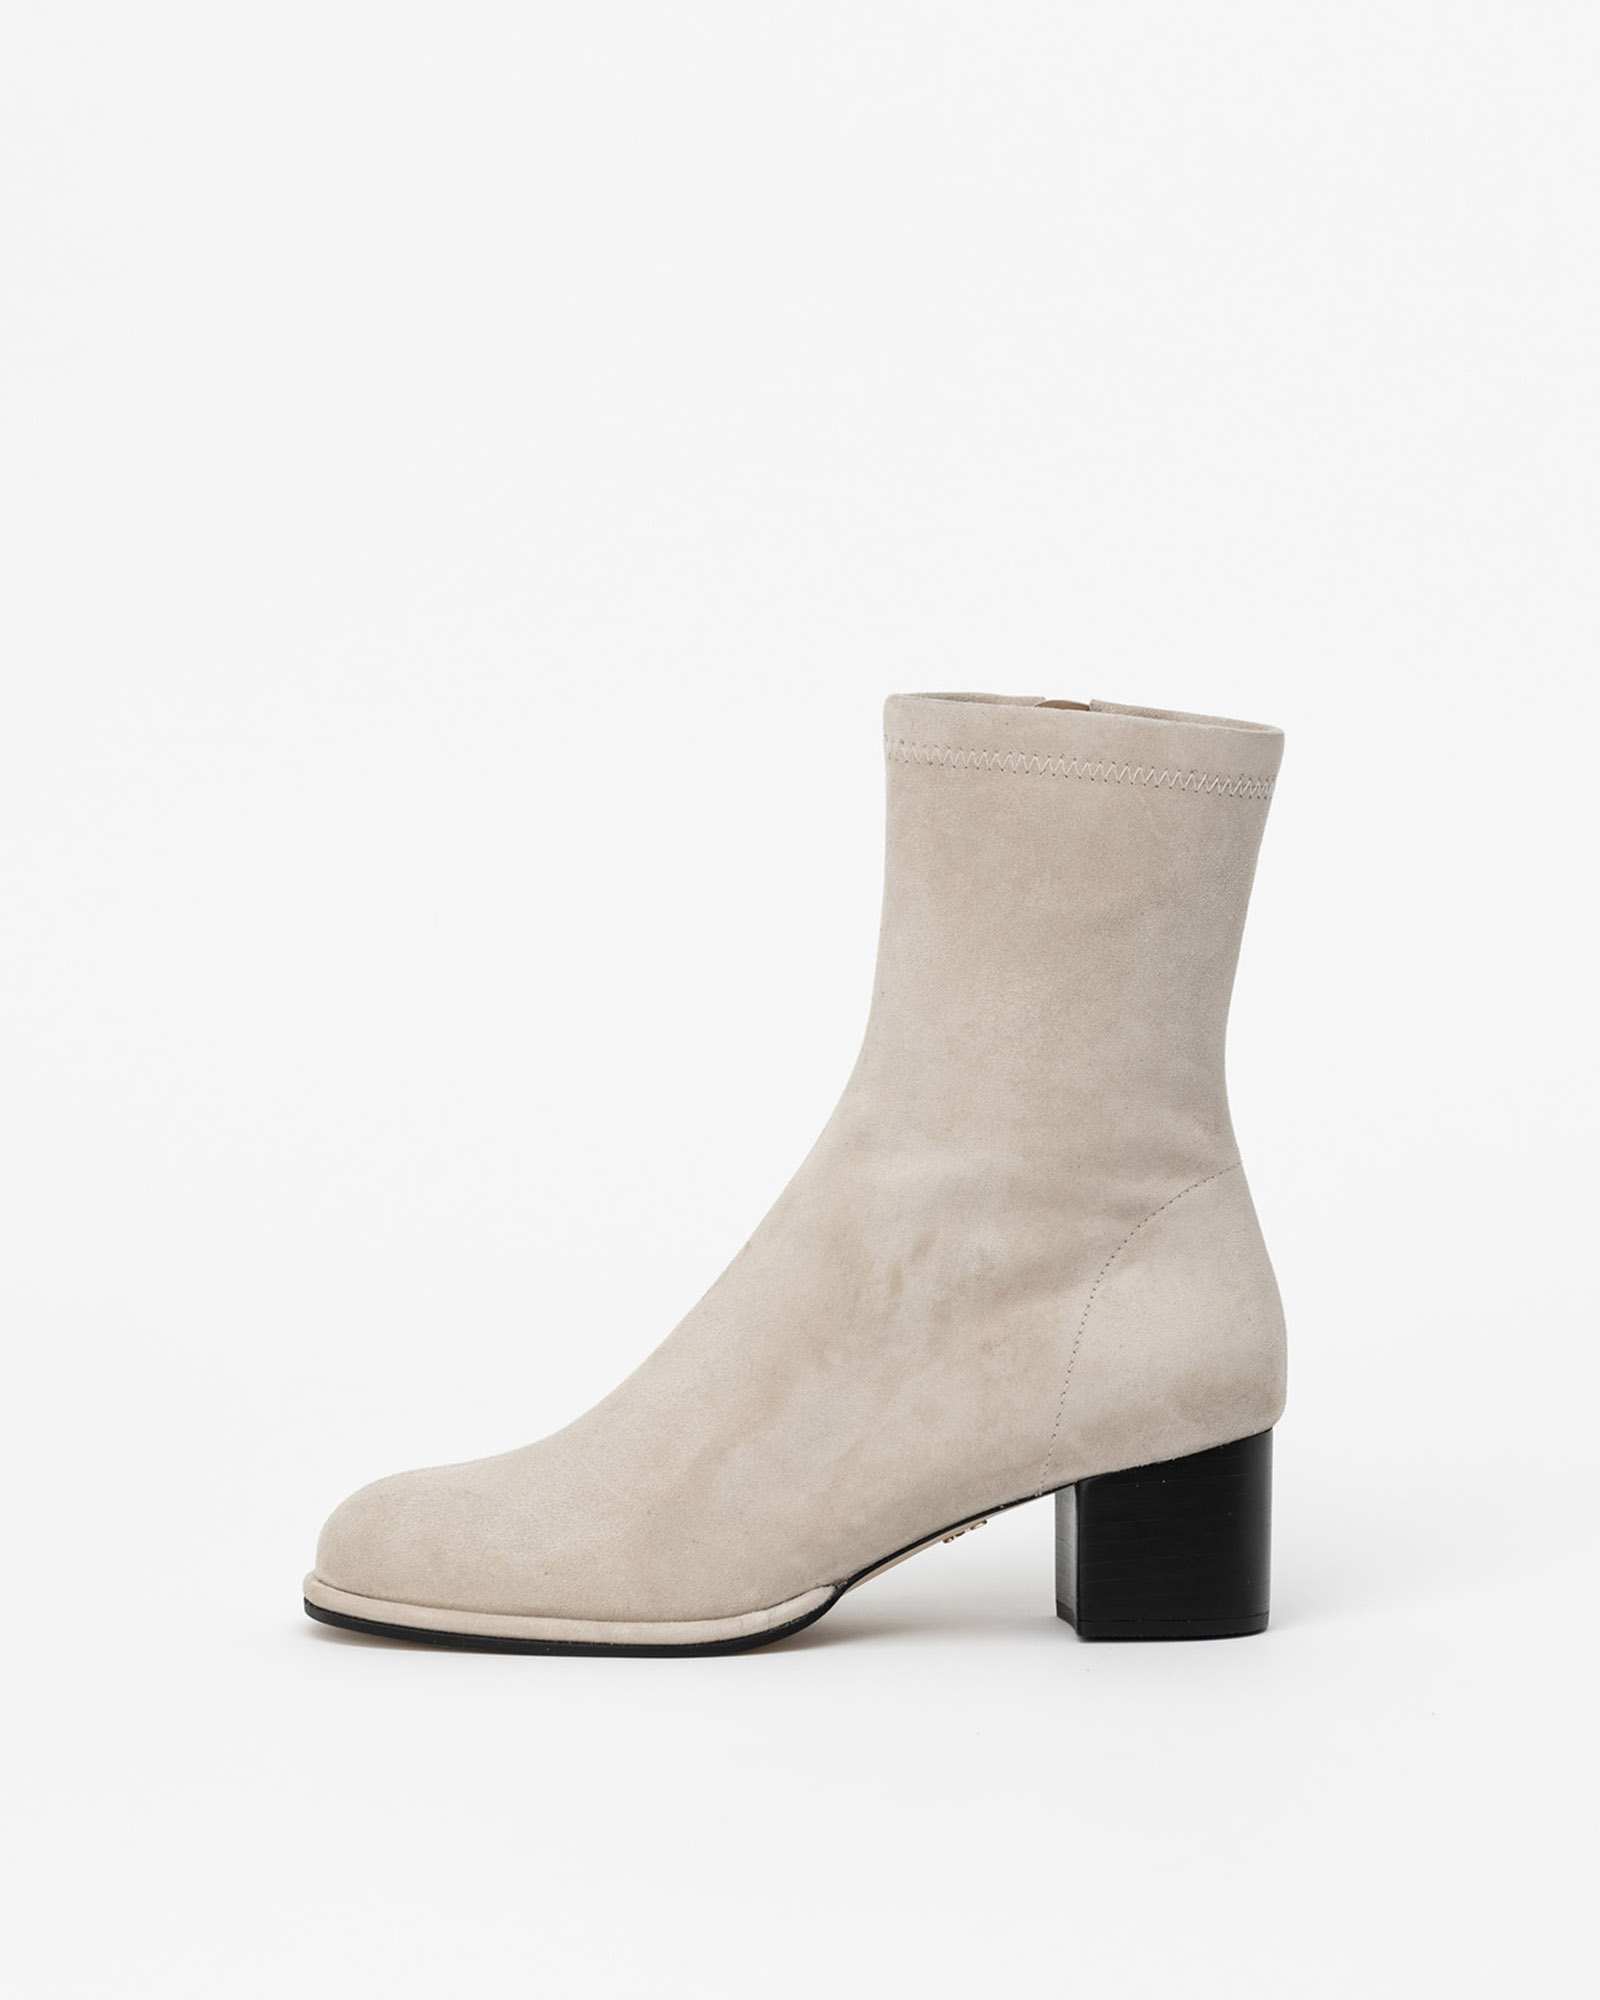 Rendez Boots in Ivory Suede